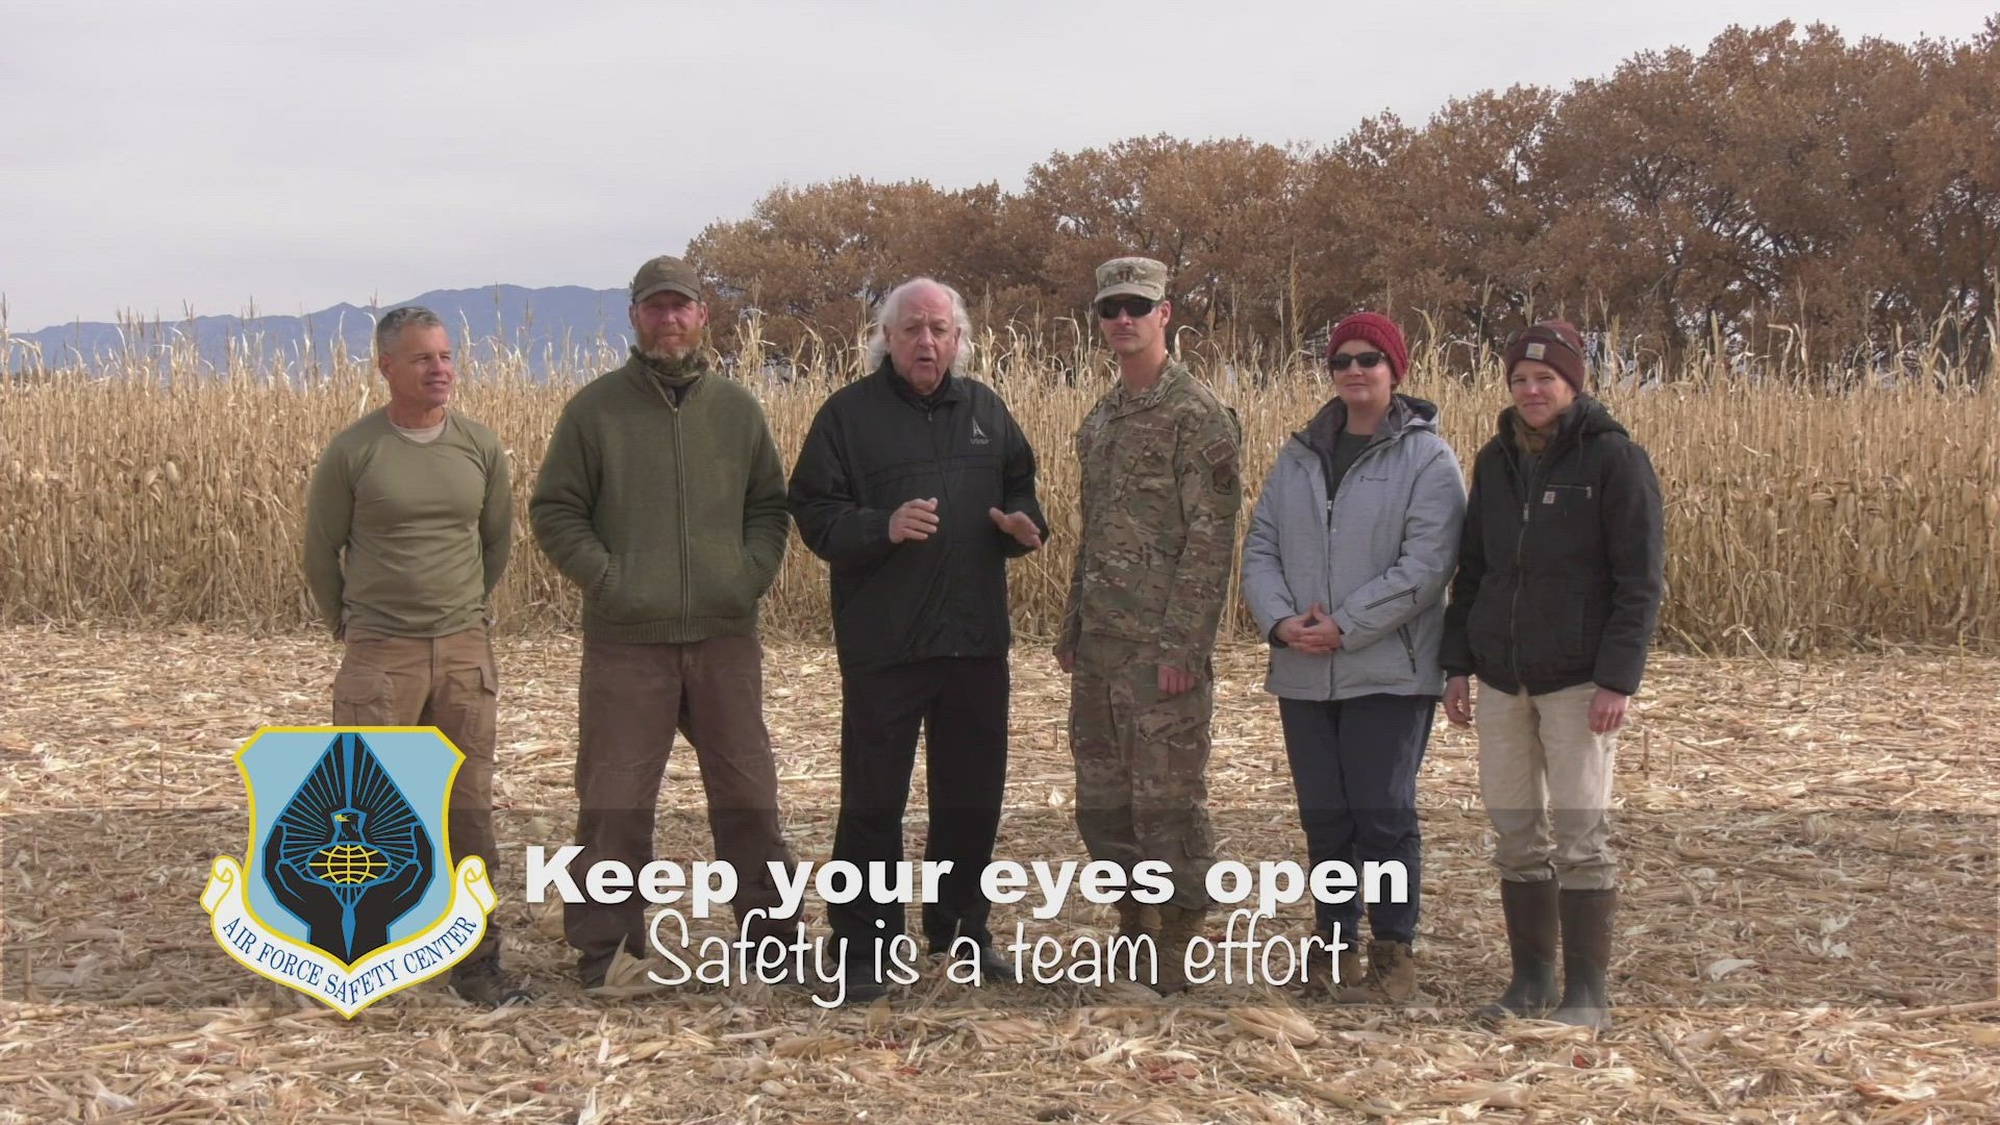 In this commercial "Dr. Love" discusses tagging birds as part of the Air Force BASH program and reminds us that everyone plays a role in the overall safety team, encouraging everyone to "Do your part"